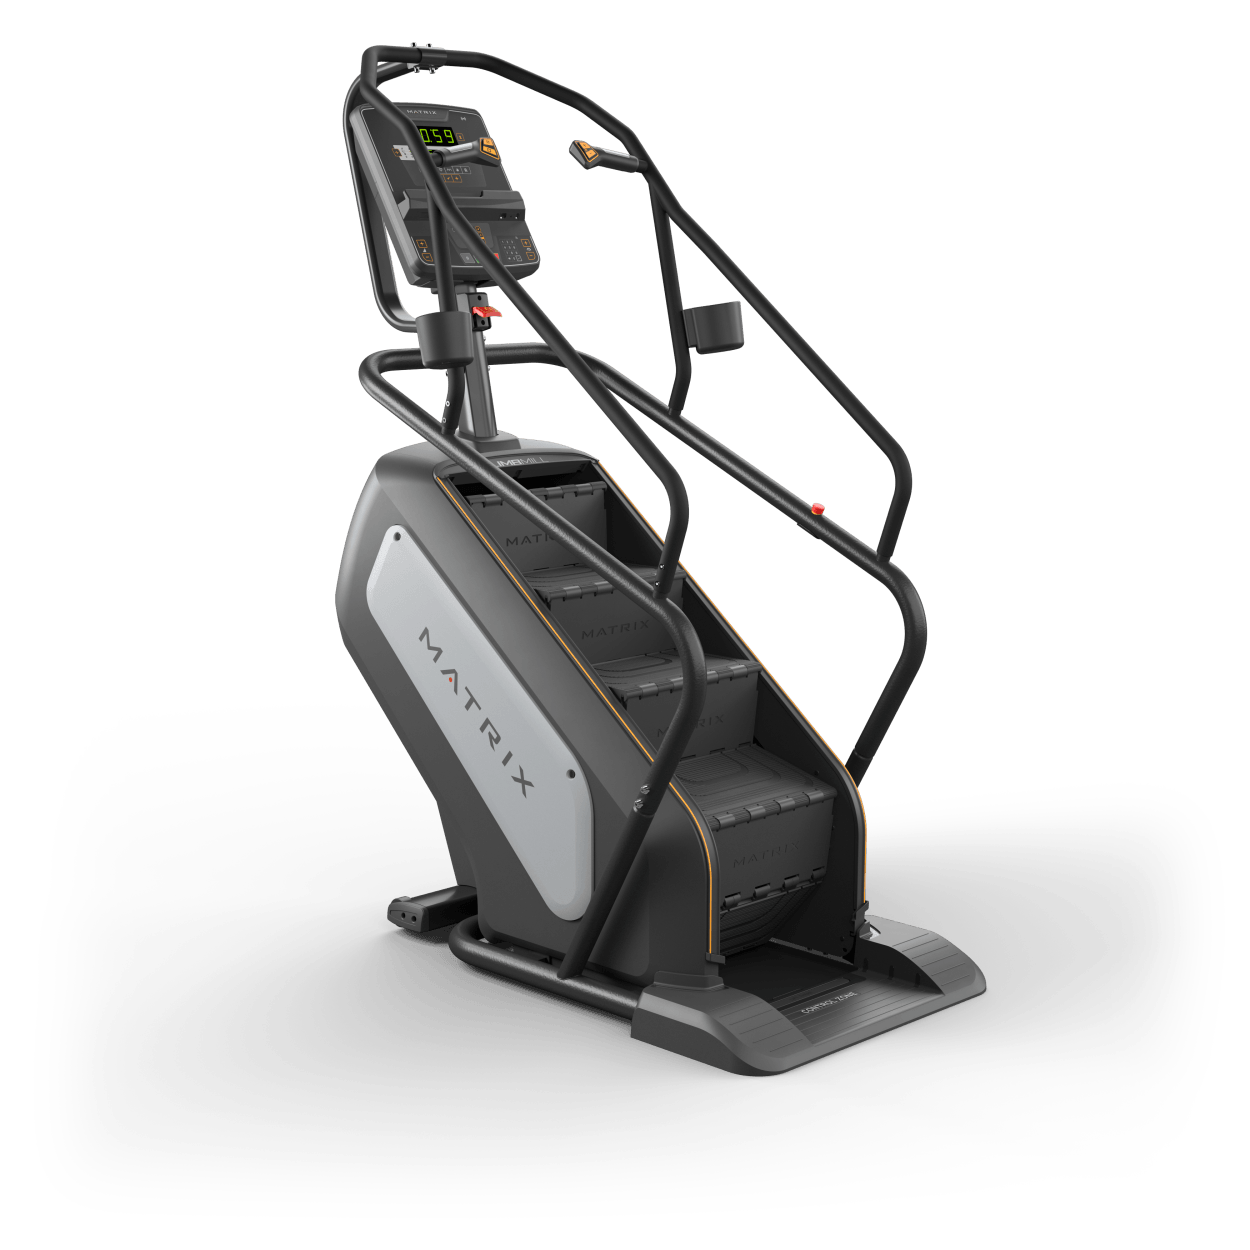 Matrix Fitness Performance Climbmill with LED Console full view | Fitness Experience